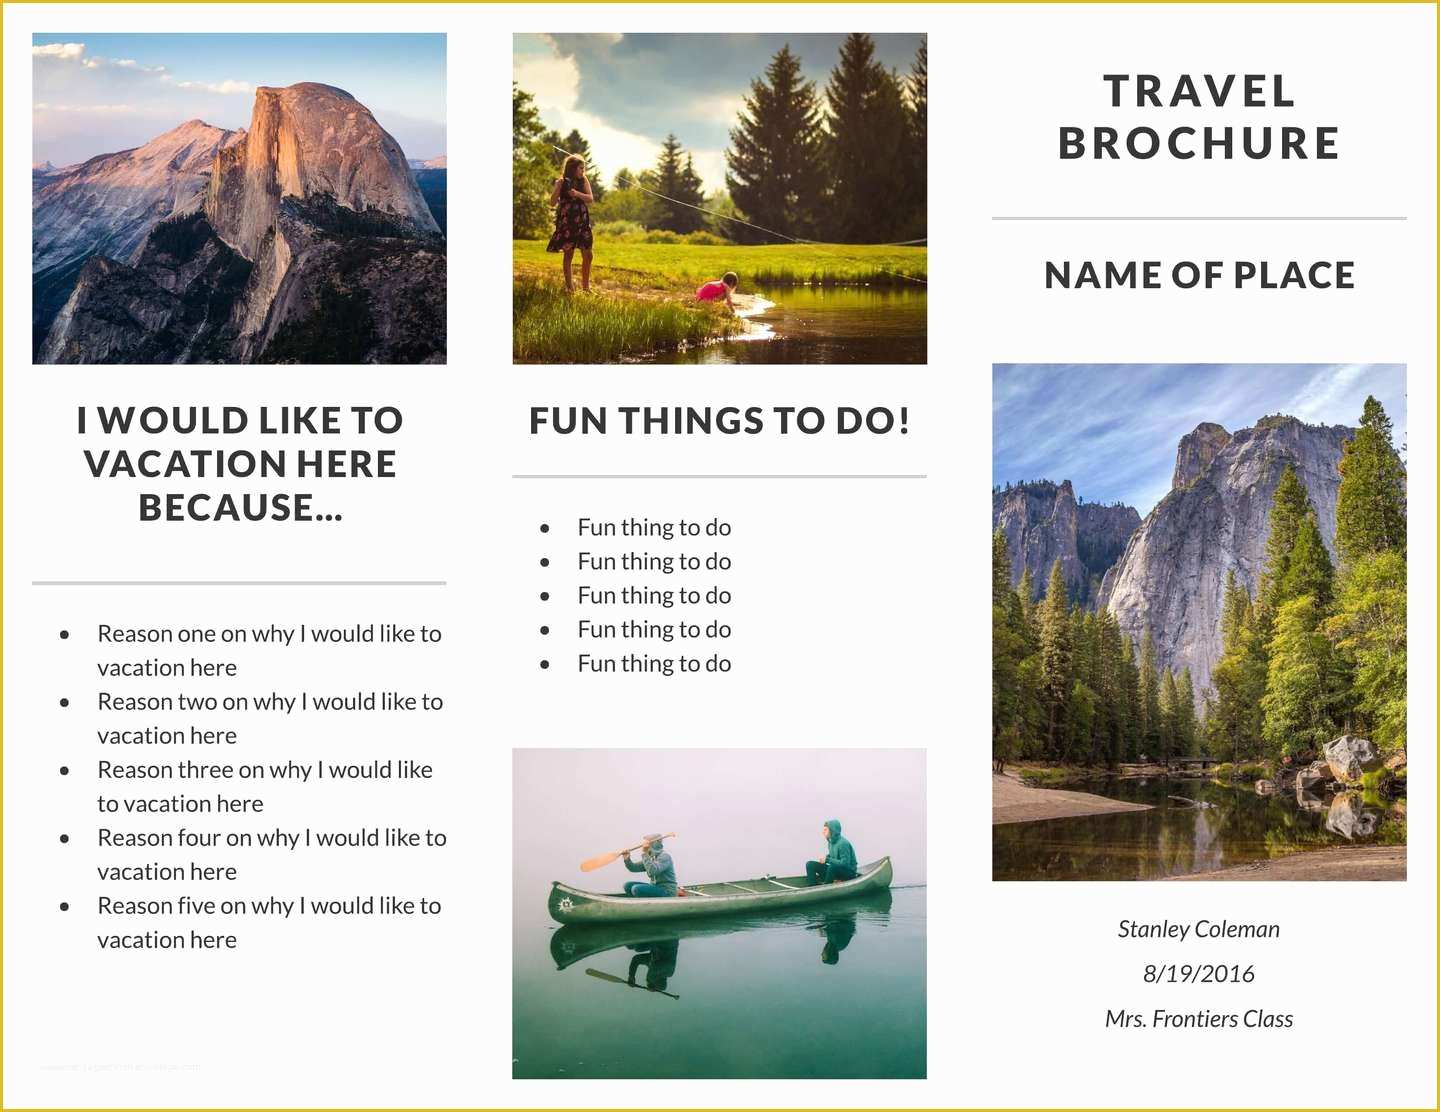 Travel Brochure Template Free Of Free Travel Brochure Templates & Examples [8 Free Templates]